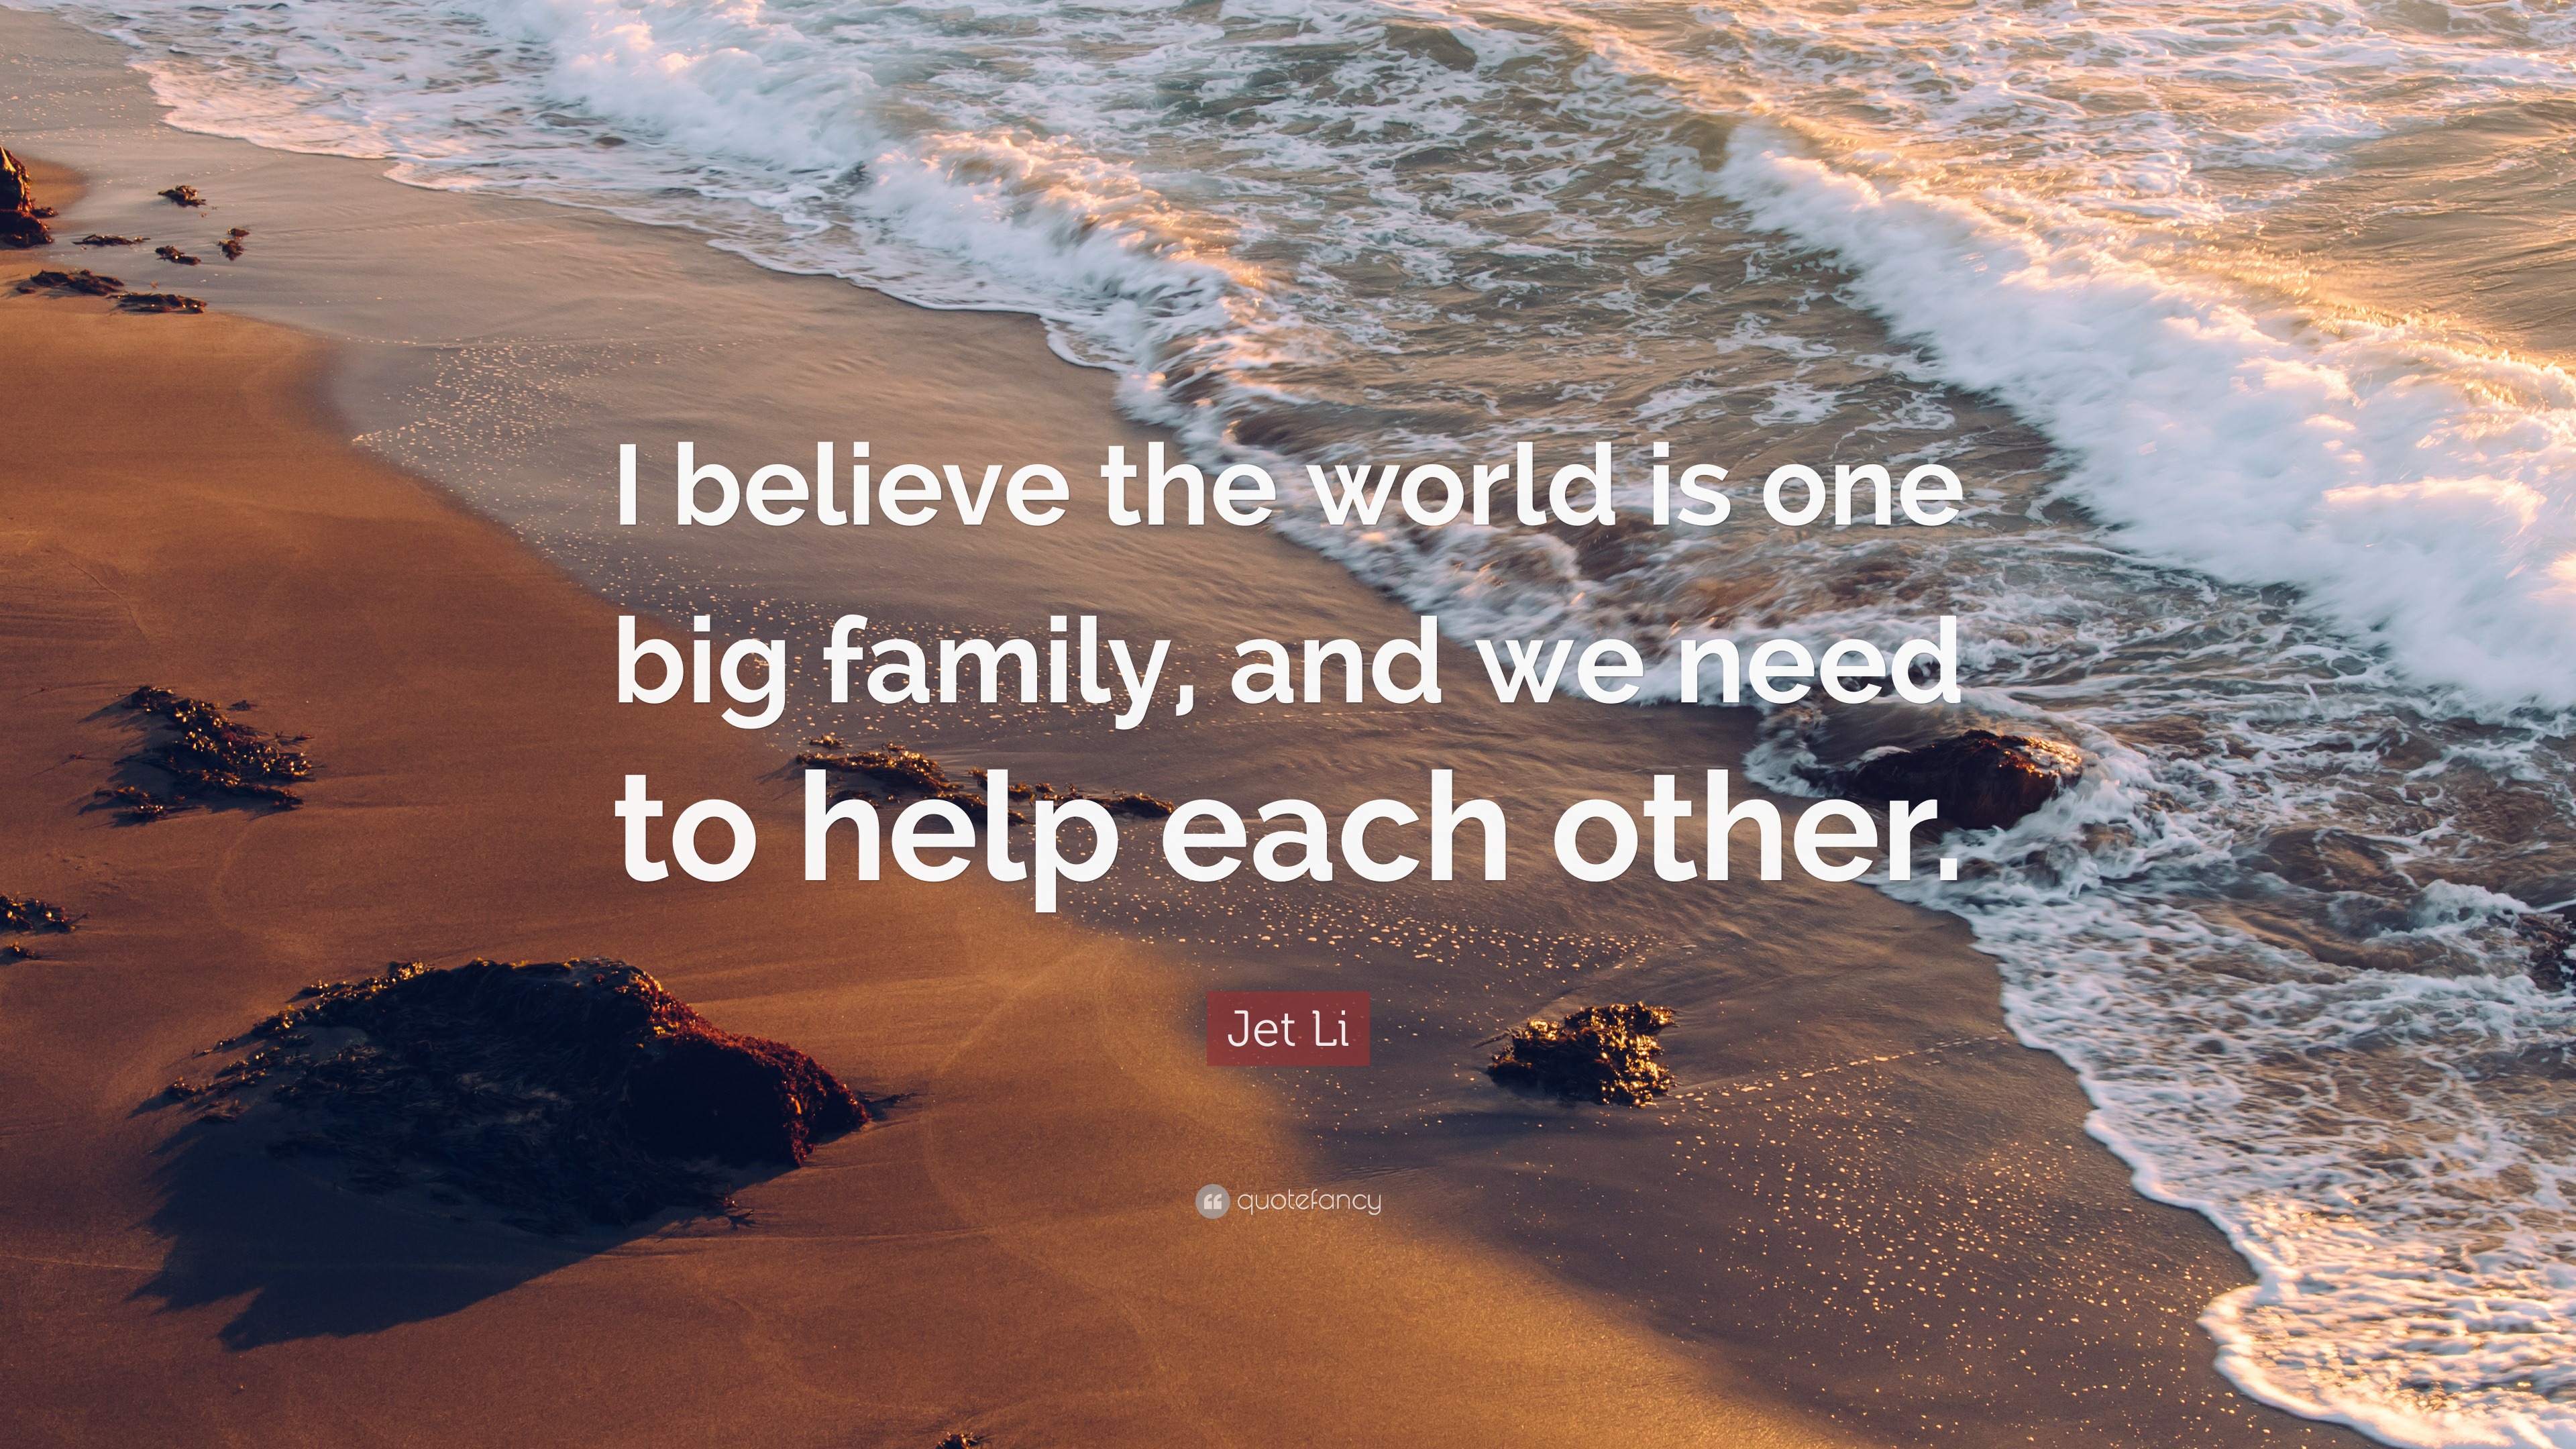 Jet Li Quote: “I believe the world is one big family, and we need to ...